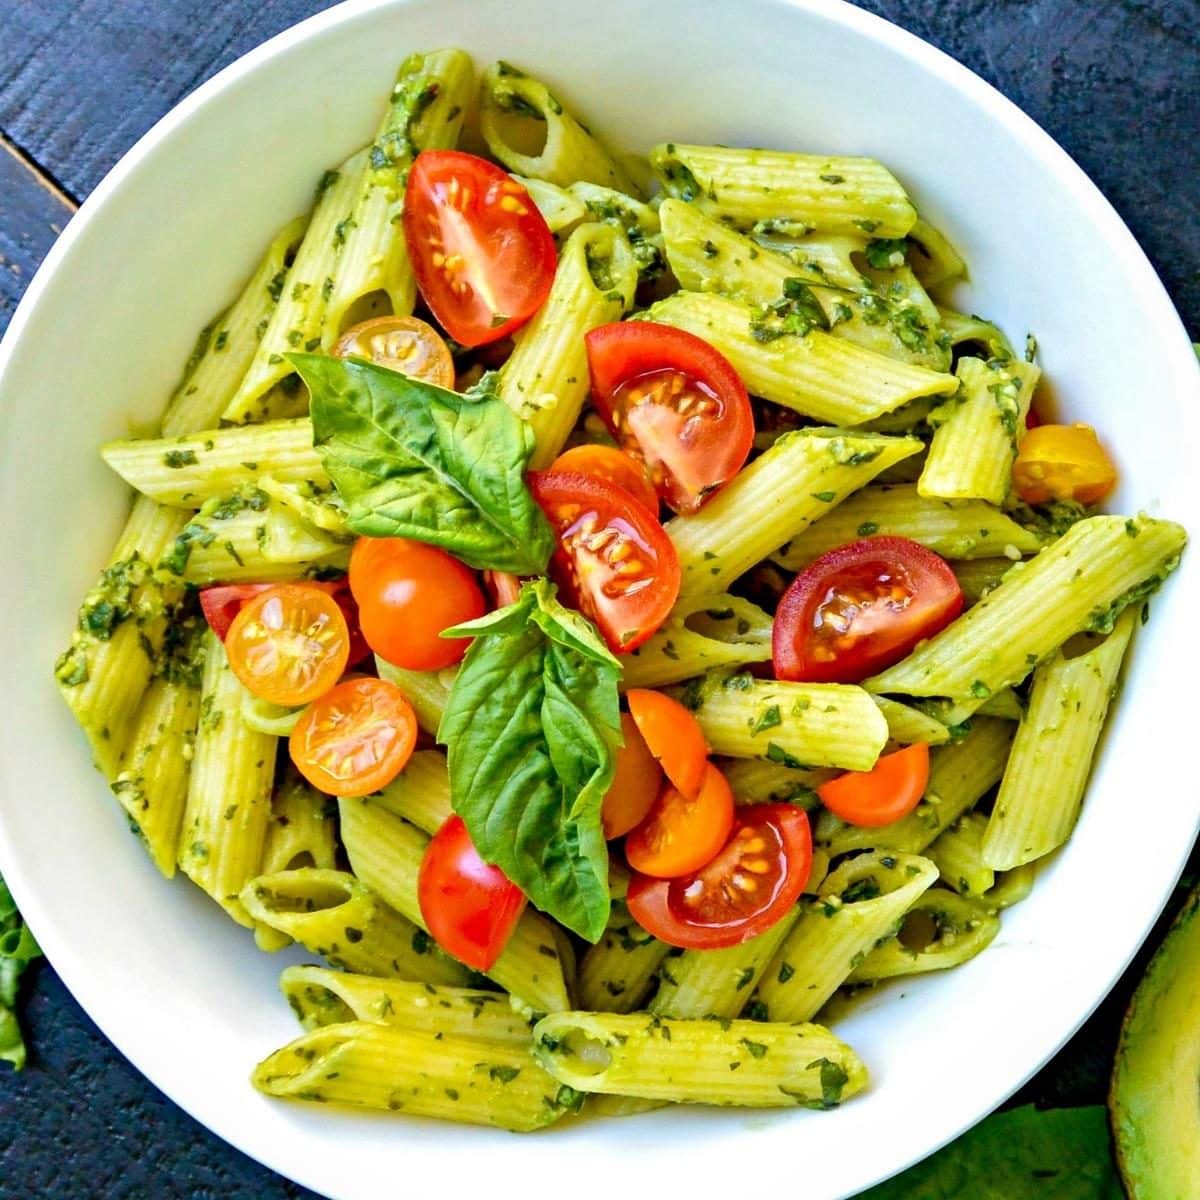 Bowl of penne tossed with vegan avocado sauce and topped with cherry tomato halves.